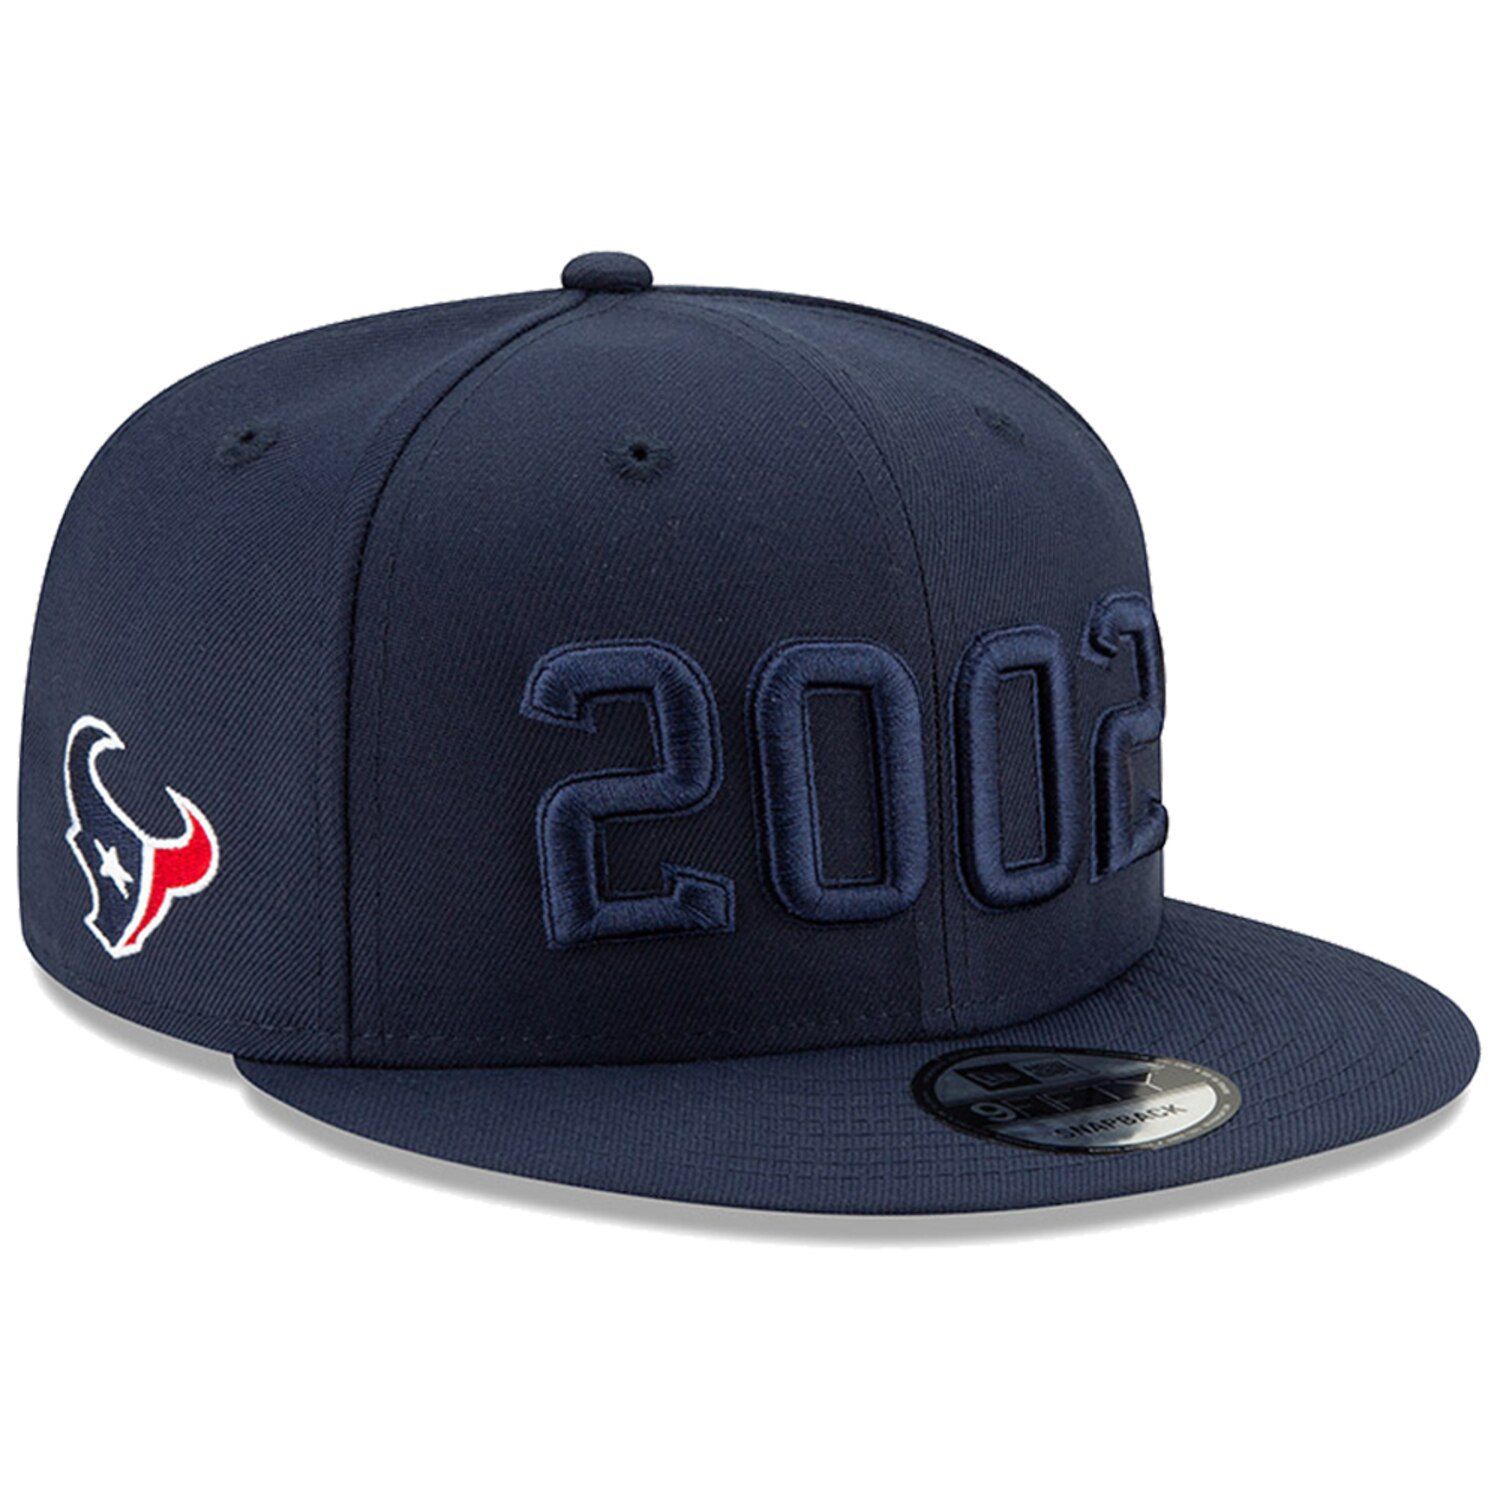 youth texans hat